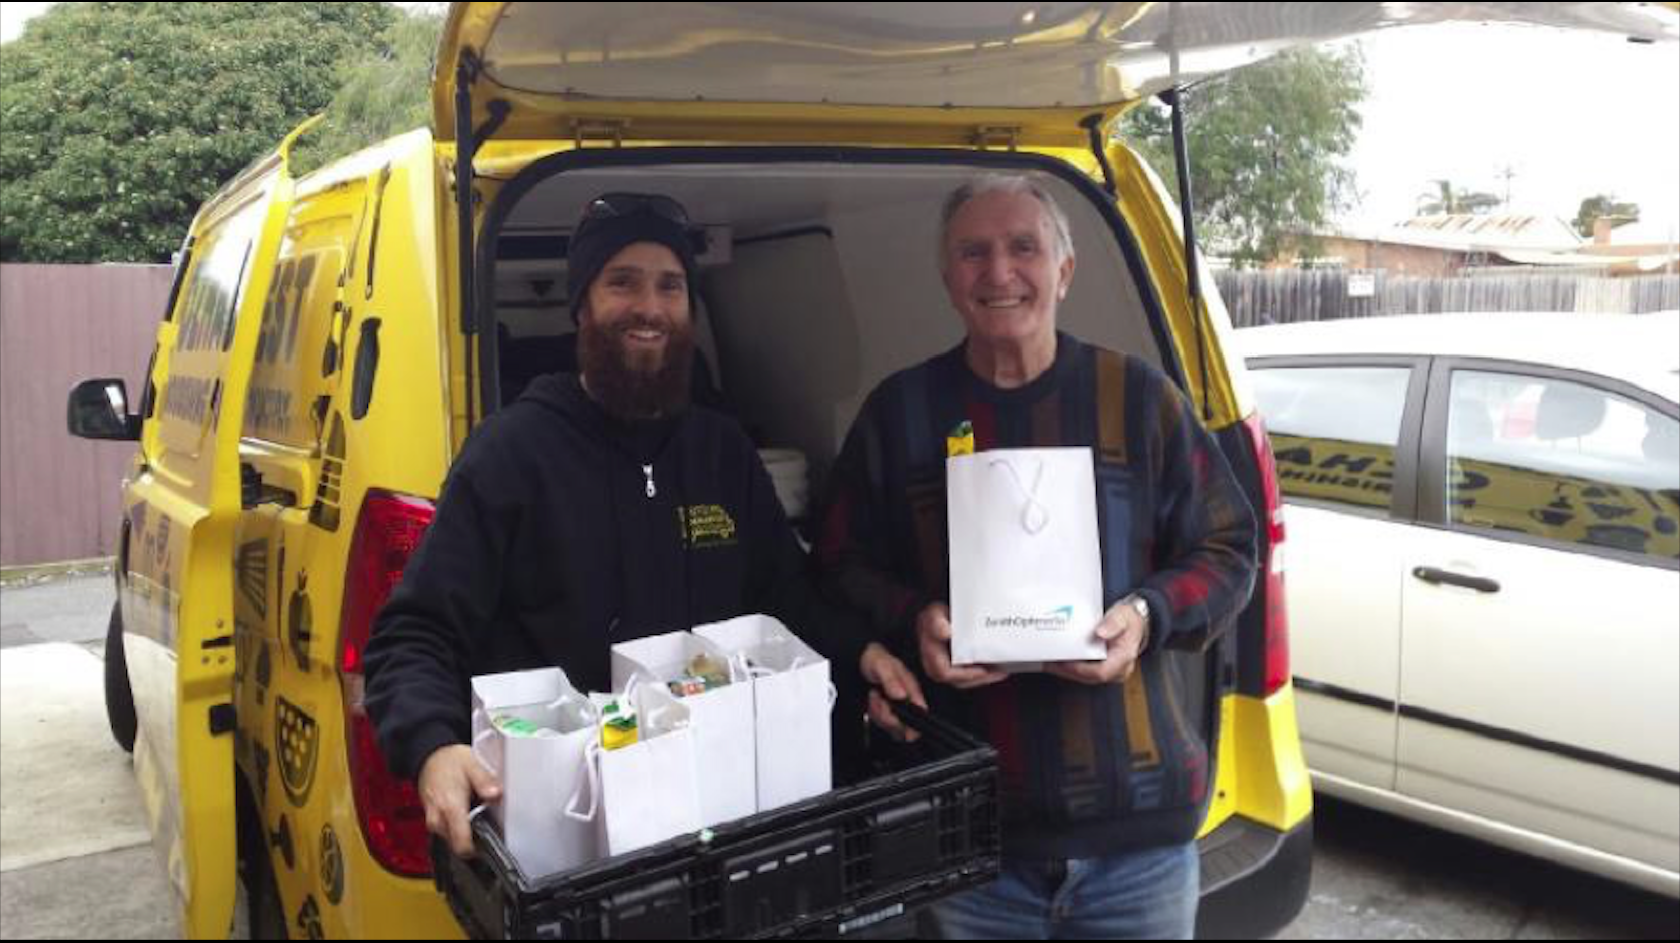 Two men stand by a van holding food parcels, smiling. 